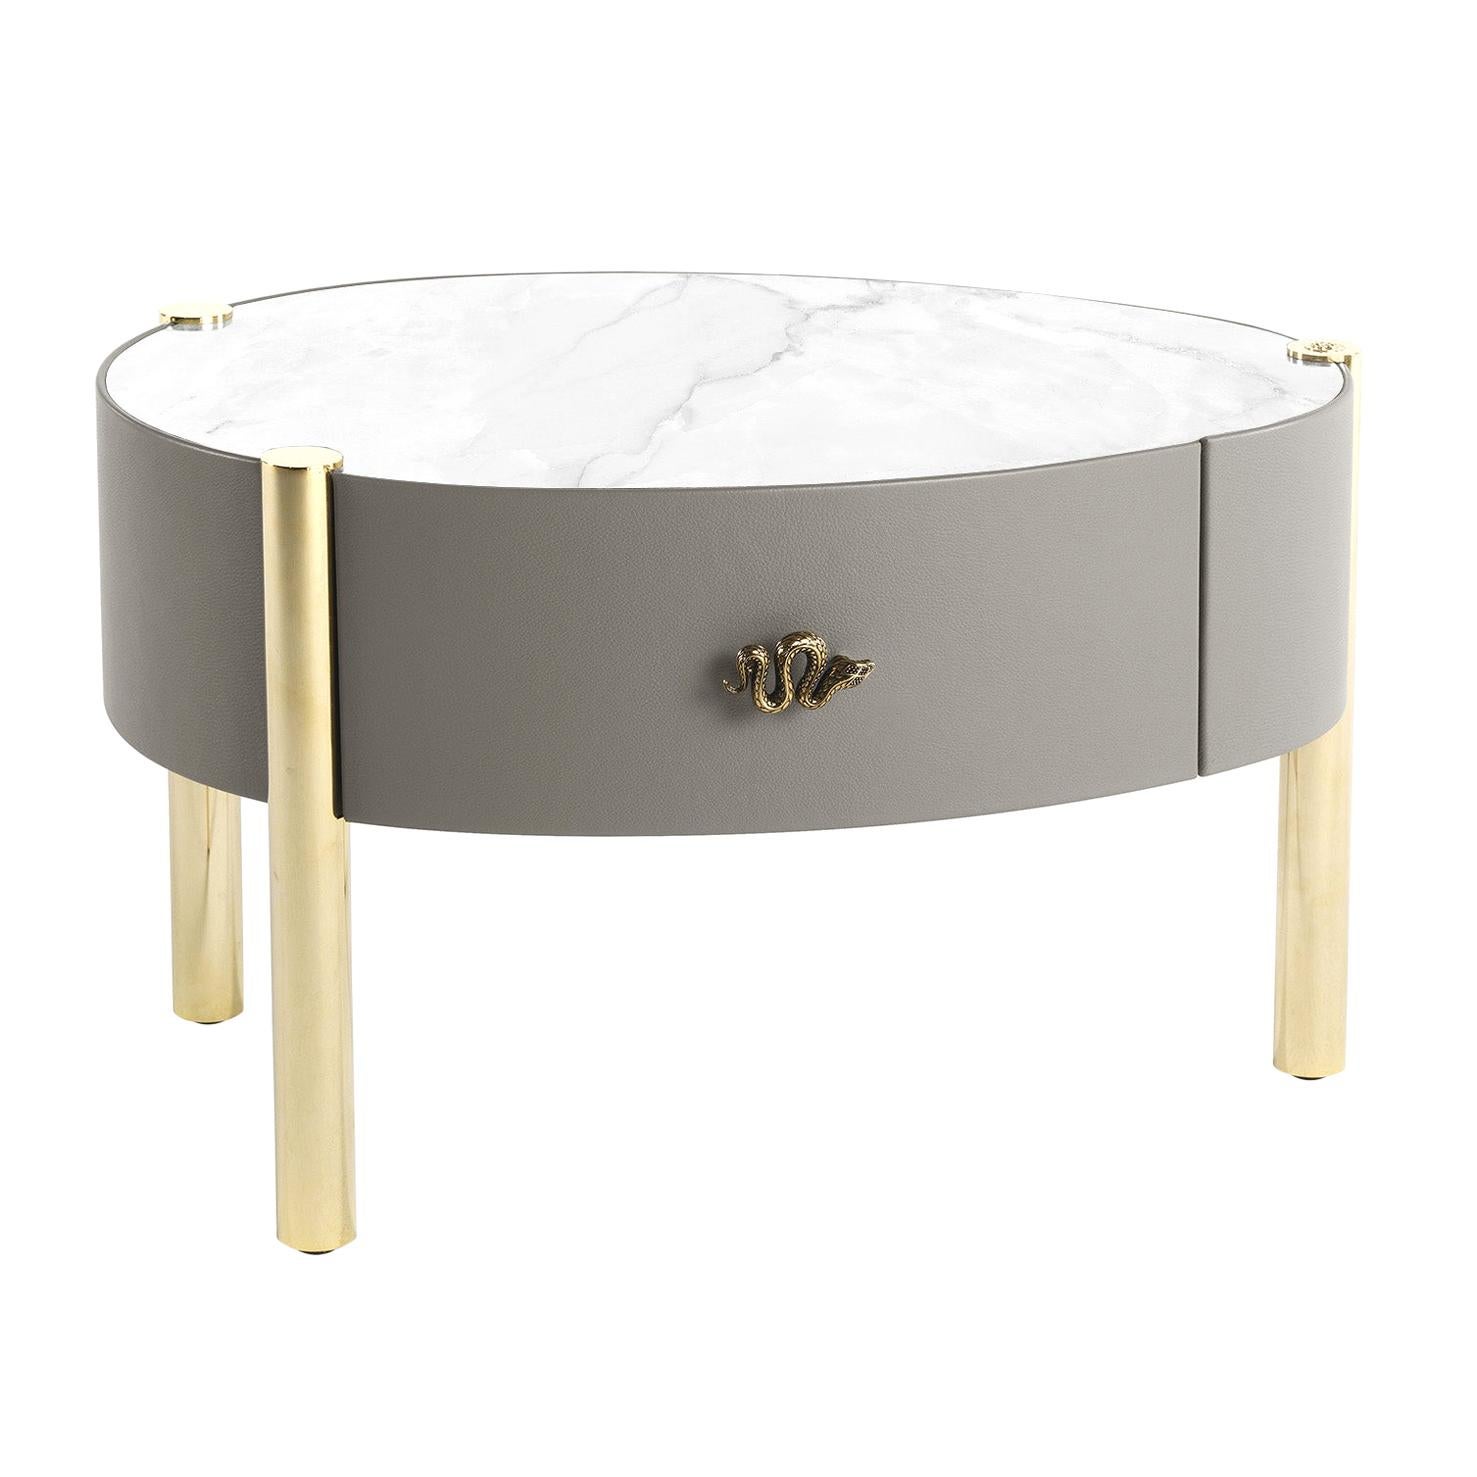 21st Century Trinidad Night Table with Marble by Roberto Cavalli Home Interiors For Sale